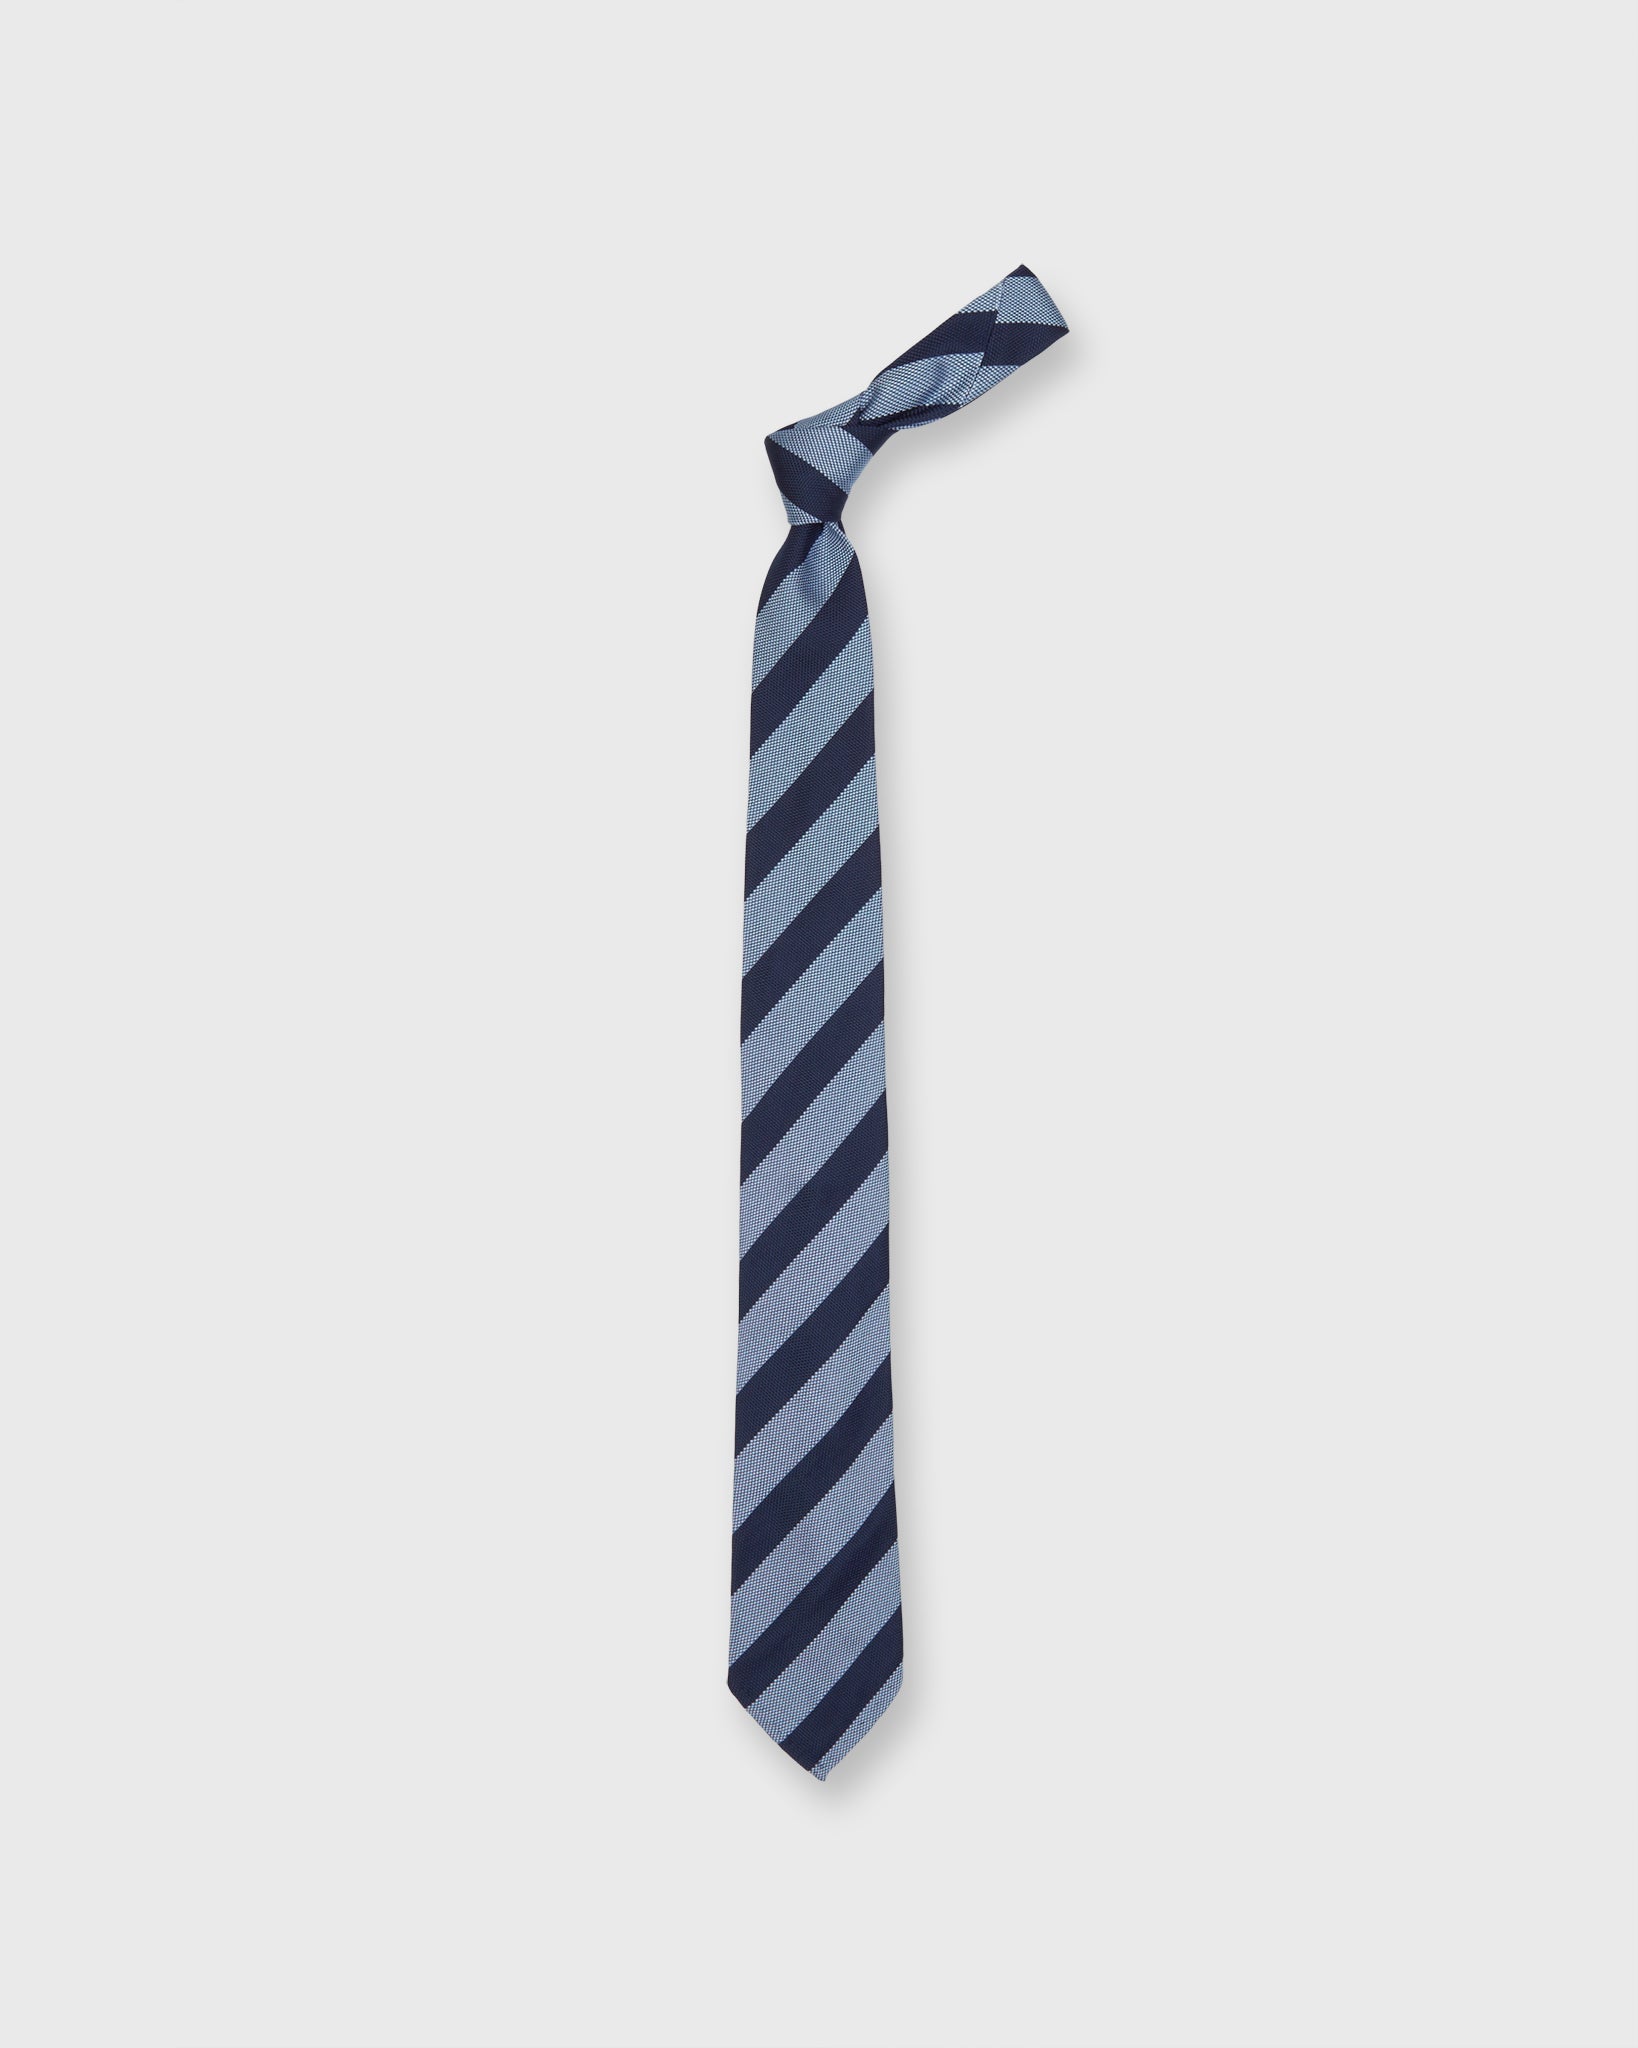 Silk Woven Tie in Navy/French Blue Awning Stripe